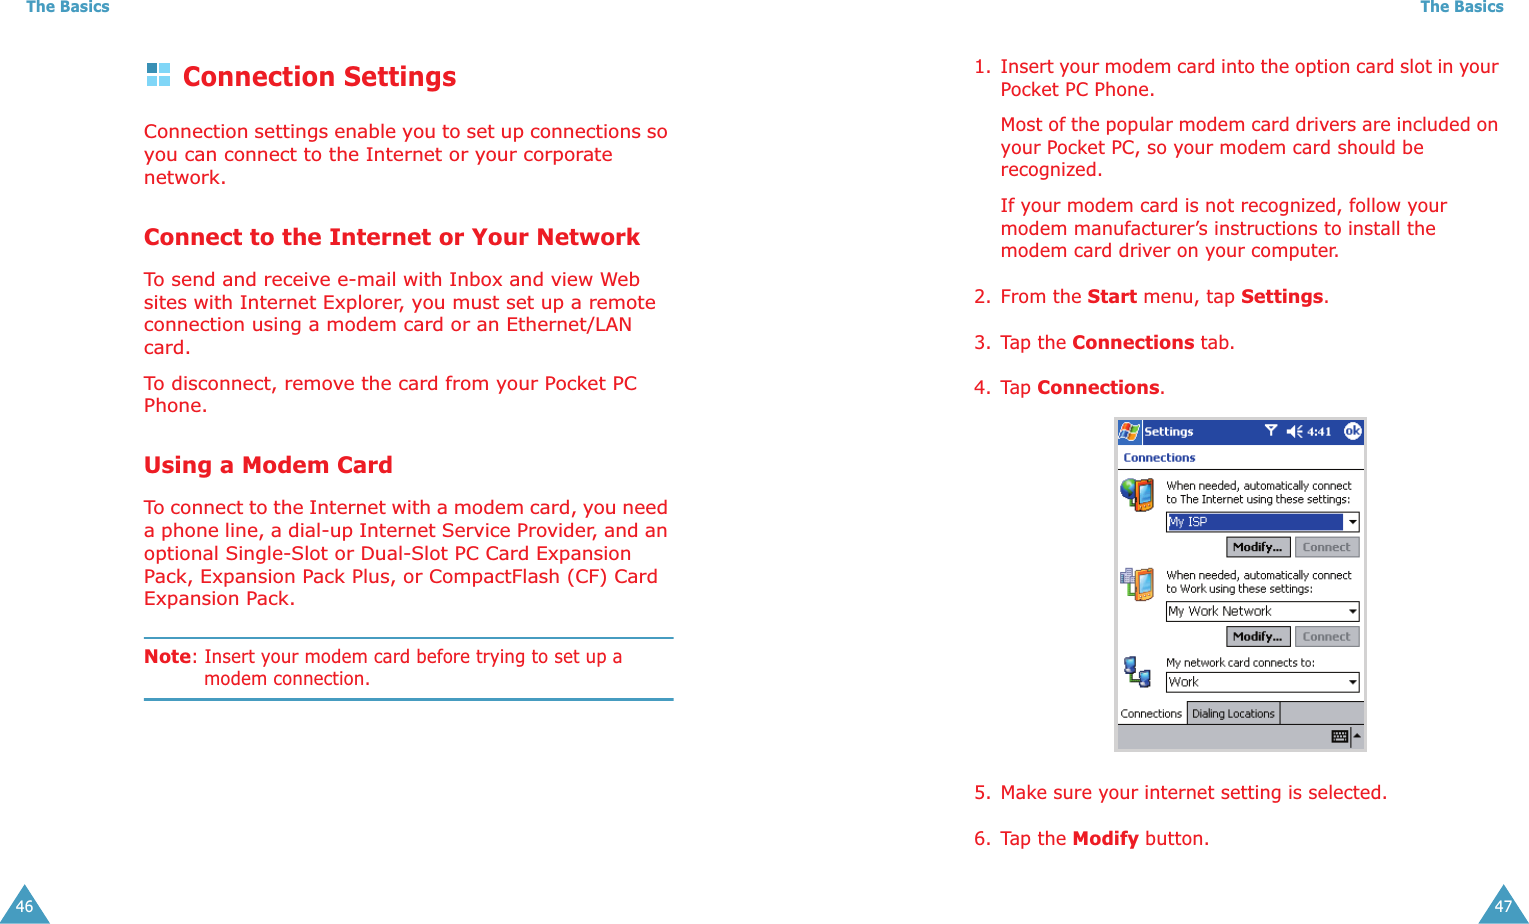 The Basics46Connection SettingsConnection settings enable you to set up connections so you can connect to the Internet or your corporate network.Connect to the Internet or Your NetworkTo send and receive e-mail with Inbox and view Web sites with Internet Explorer, you must set up a remote connection using a modem card or an Ethernet/LAN card.To disconnect, remove the card from your Pocket PC Phone.Using a Modem CardTo connect to the Internet with a modem card, you need a phone line, a dial-up Internet Service Provider, and an optional Single-Slot or Dual-Slot PC Card Expansion Pack, Expansion Pack Plus, or CompactFlash (CF) Card Expansion Pack.Note: Insert your modem card before trying to set up a modem connection.The Basics471. Insert your modem card into the option card slot in your Pocket PC Phone.Most of the popular modem card drivers are included on your Pocket PC, so your modem card should be recognized.If your modem card is not recognized, follow your modem manufacturer’s instructions to install the modem card driver on your computer.2. From the Start menu, tap Settings.3. Tap the Connections tab.4. Tap Connections.5. Make sure your internet setting is selected.6. Tap the Modify button.